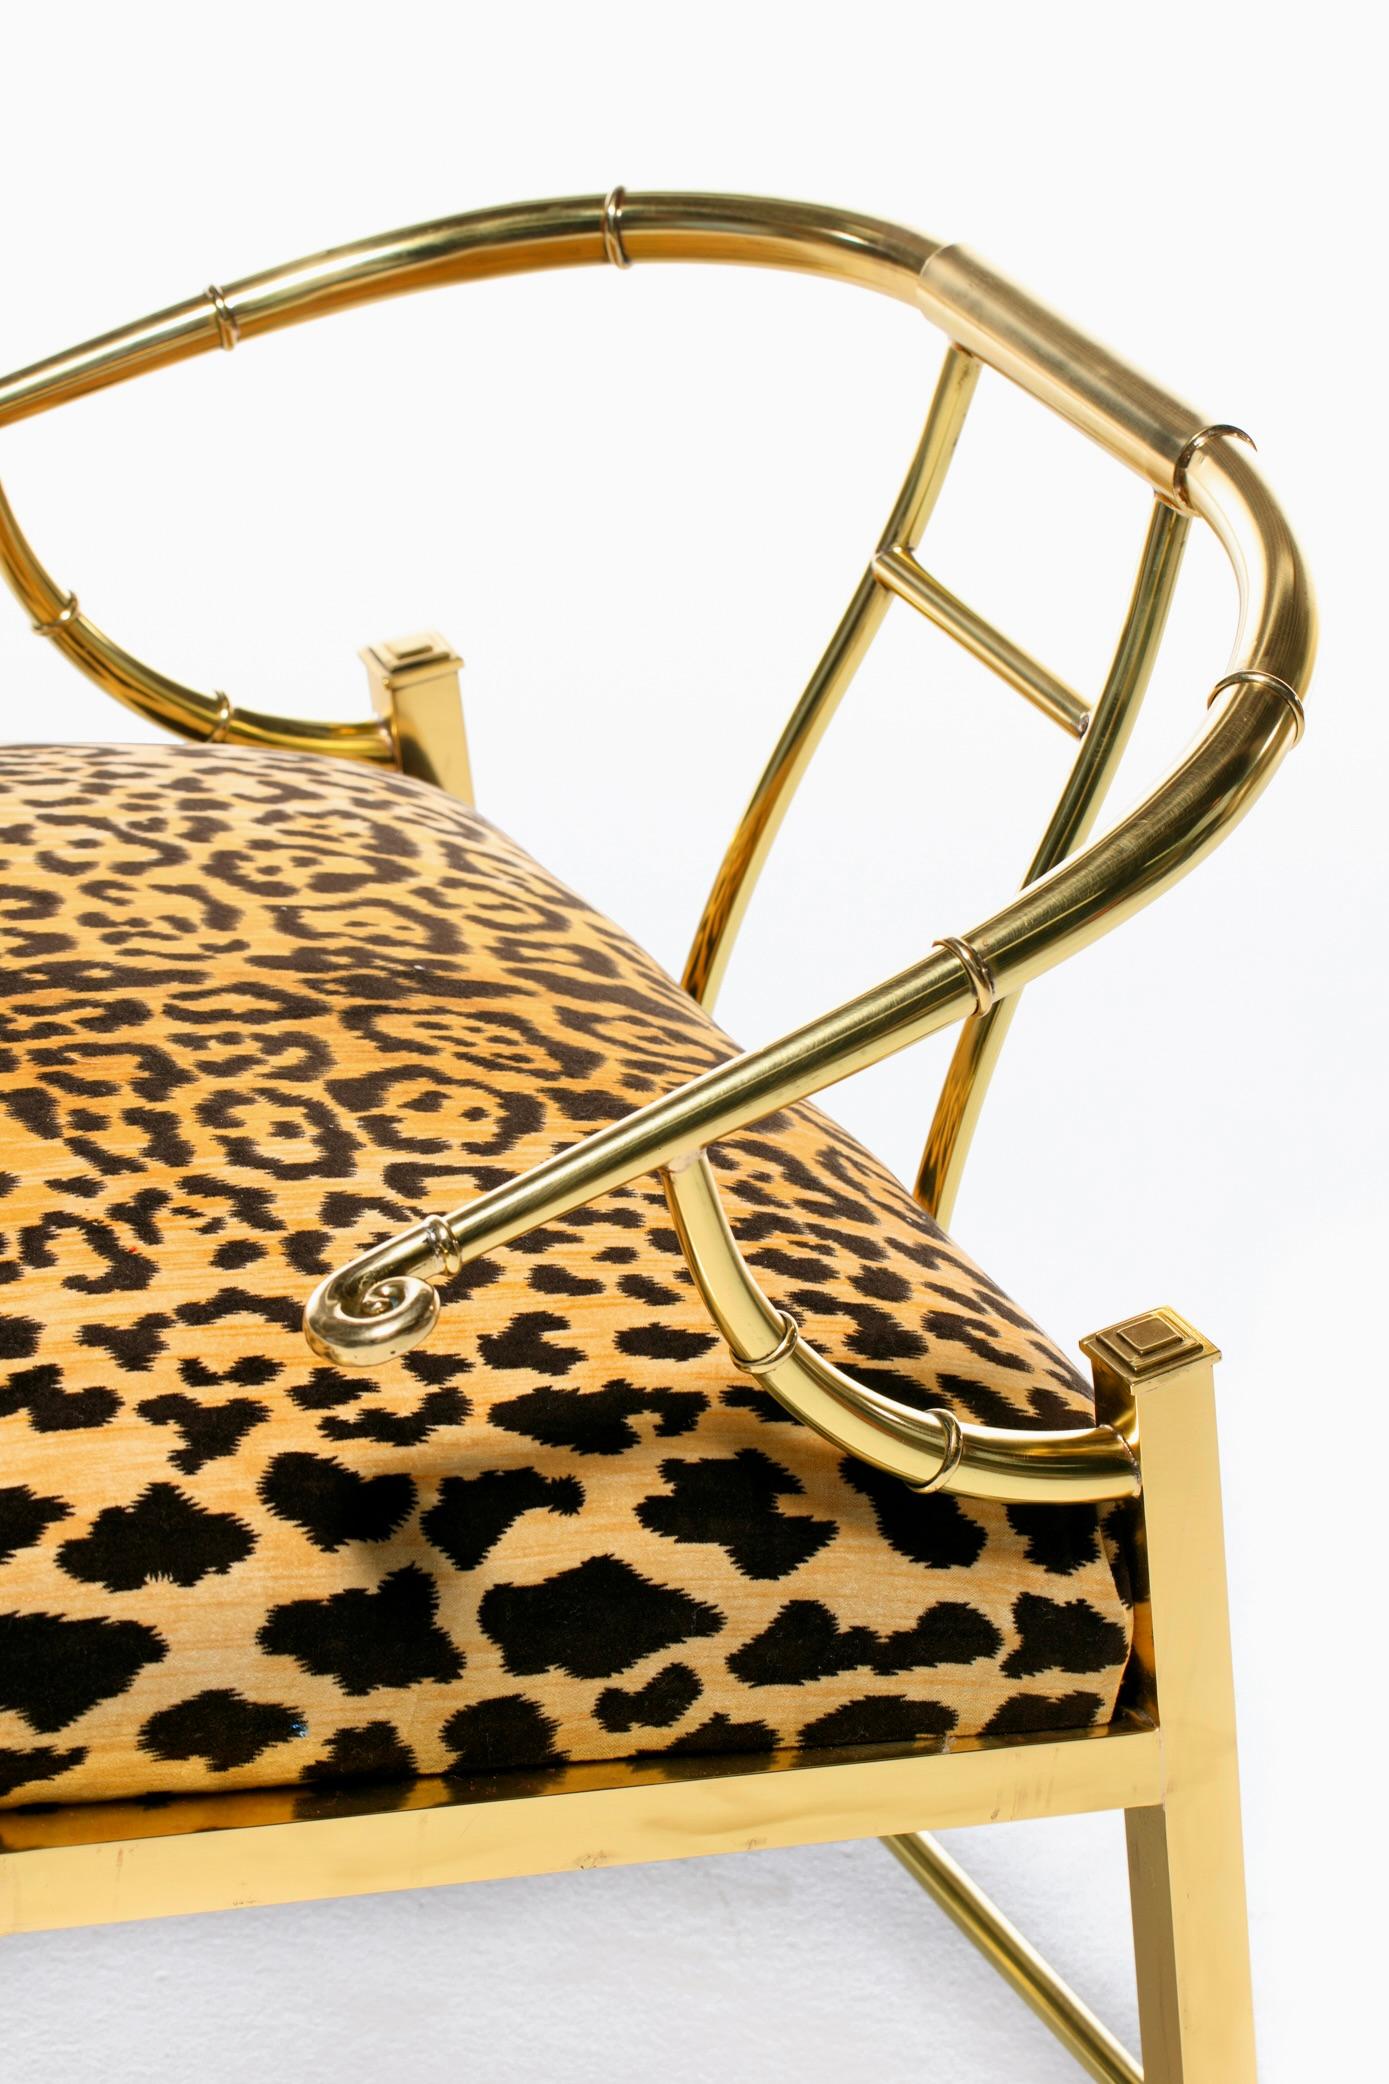 Pair of Brass Hollywood Regency Chairs in Leopard Velvet by Mastercraft C. 1960s 12